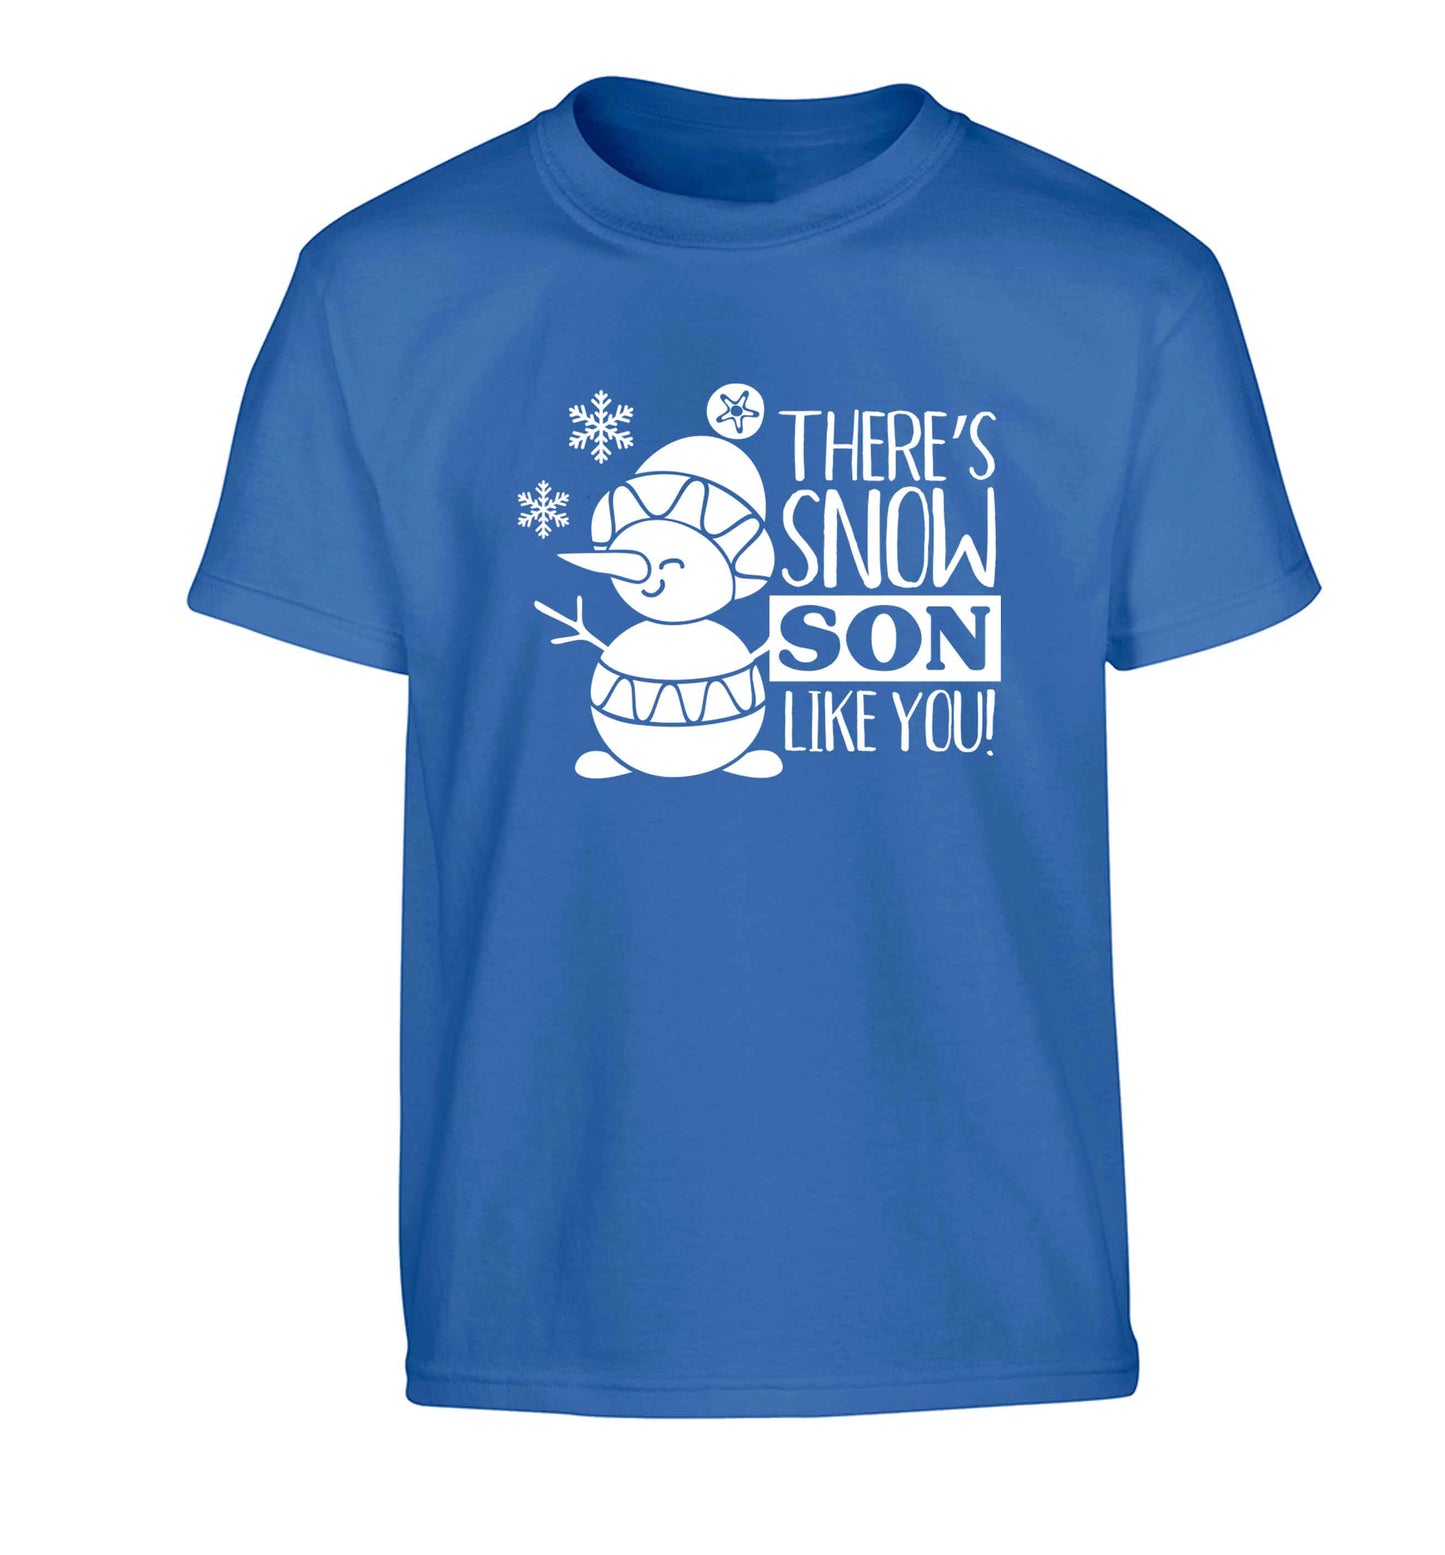 There's snow son like you Children's blue Tshirt 12-13 Years